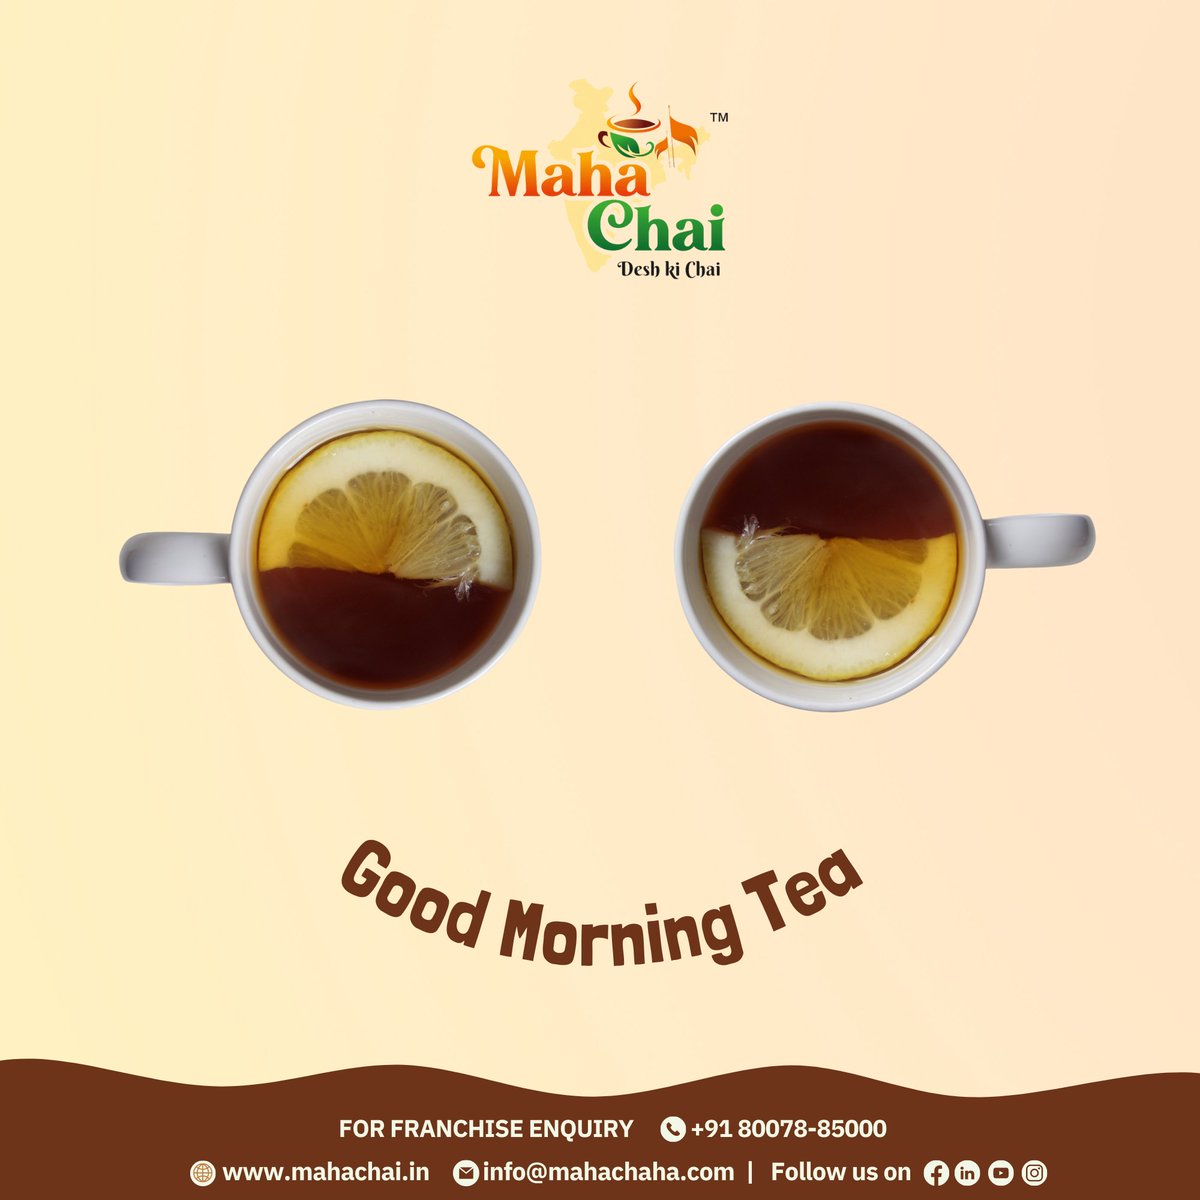 Start your mornings on a flavorful note with Maha Chai! ☀️🍵 Brew a cup of happiness and embrace the goodness of our refreshing tea ☕

#MahaChai #MorningTeaBliss #TeaTimeMagic #SipAndSavor #TeaLovers #MorningRituals #TeaAddict #MorningBoost #WakeupWithTea